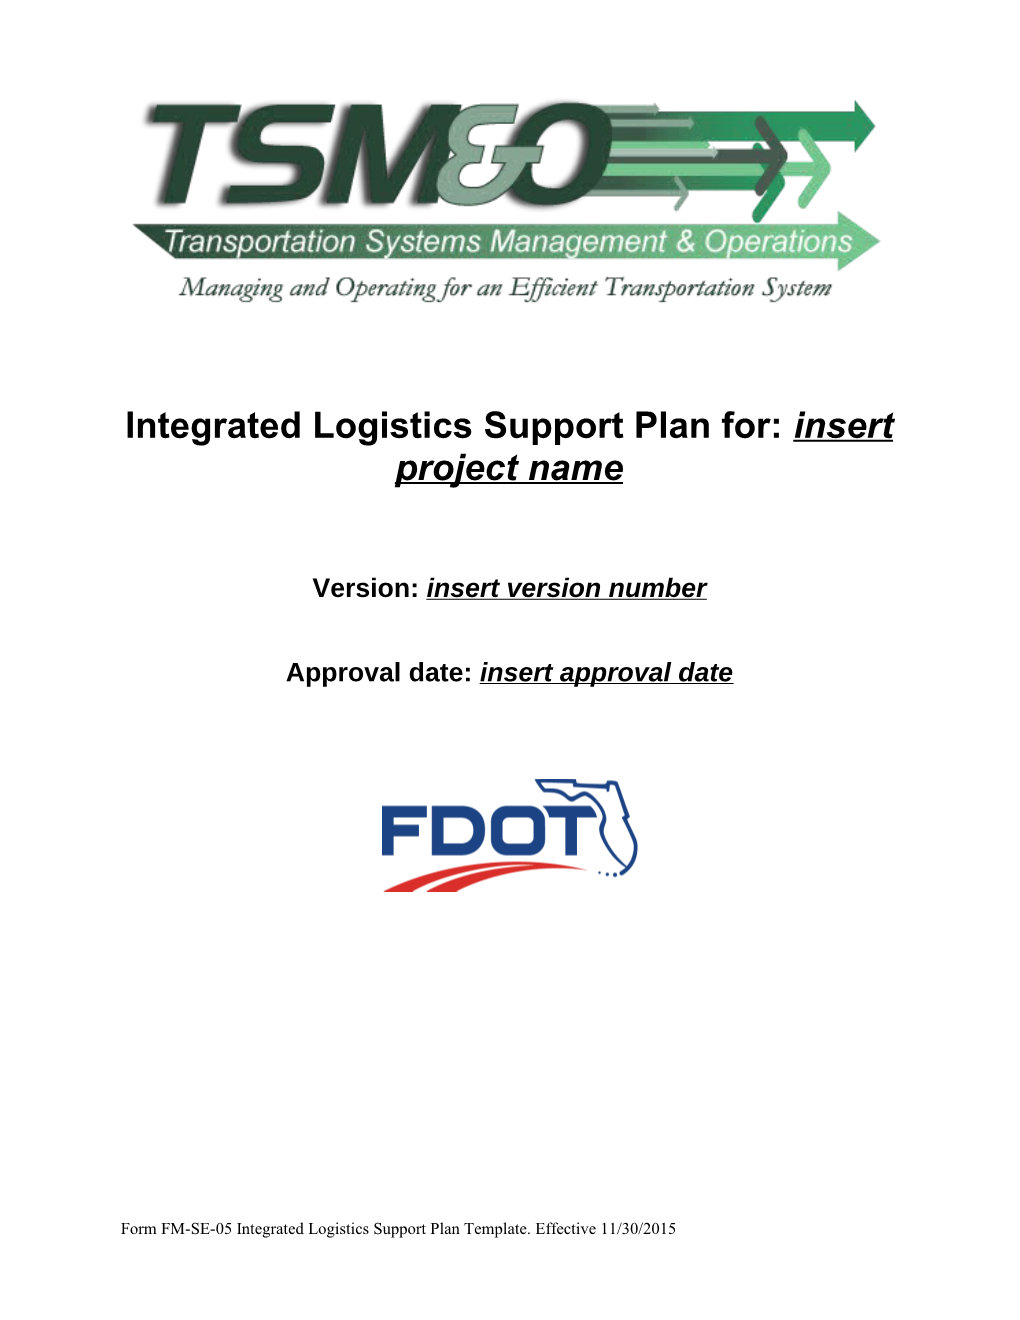 Integrated Logistics Support Plan For:Insert Project Name